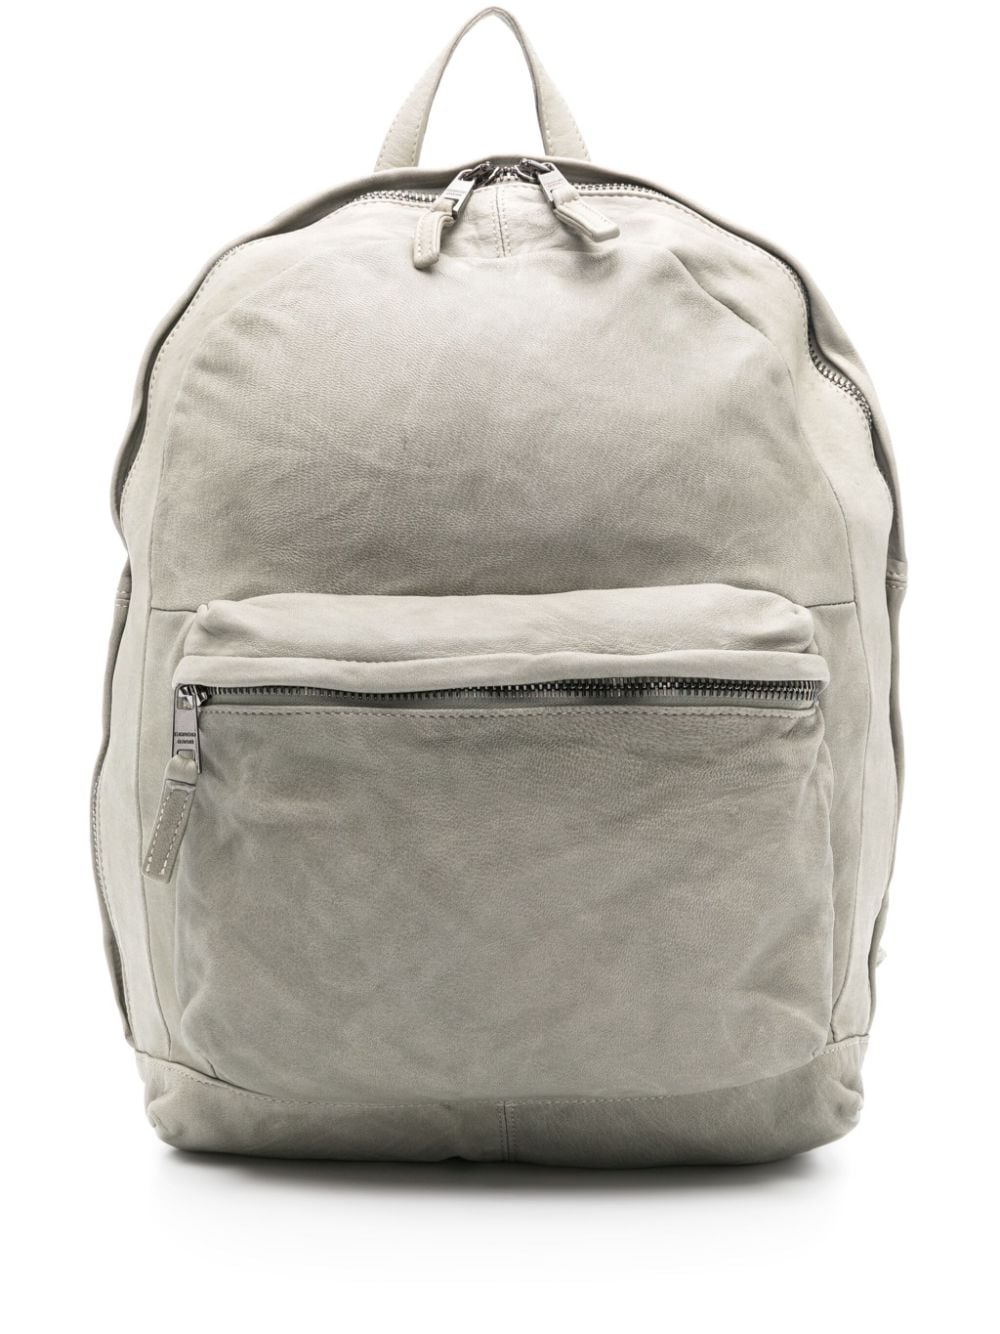 zip-up leather backpack